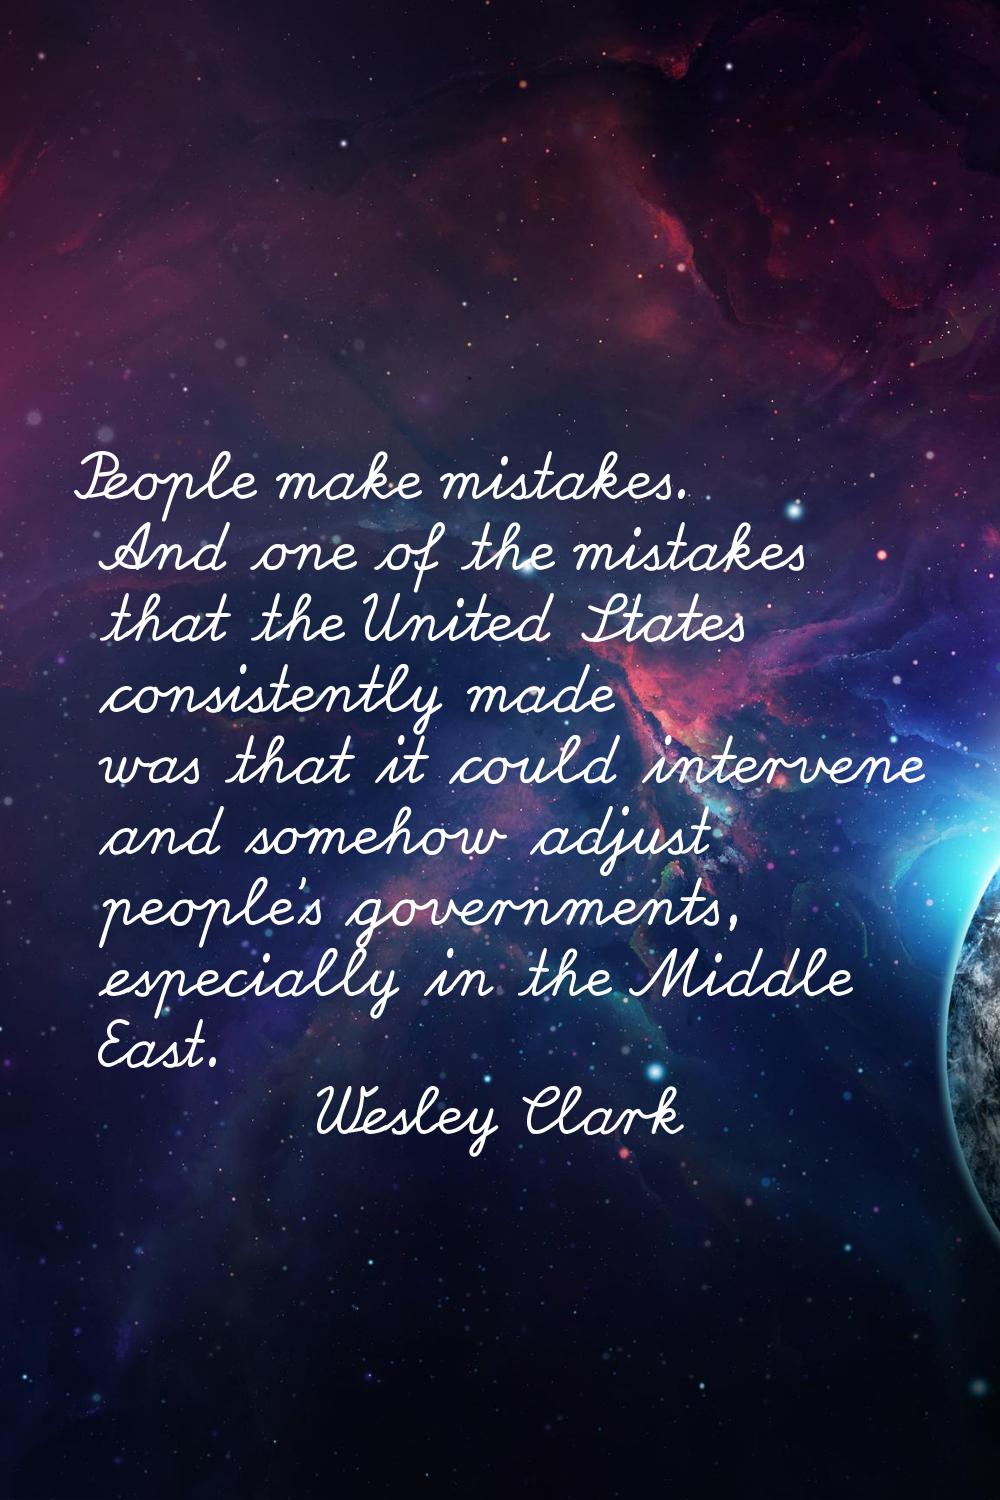 People make mistakes. And one of the mistakes that the United States consistently made was that it 